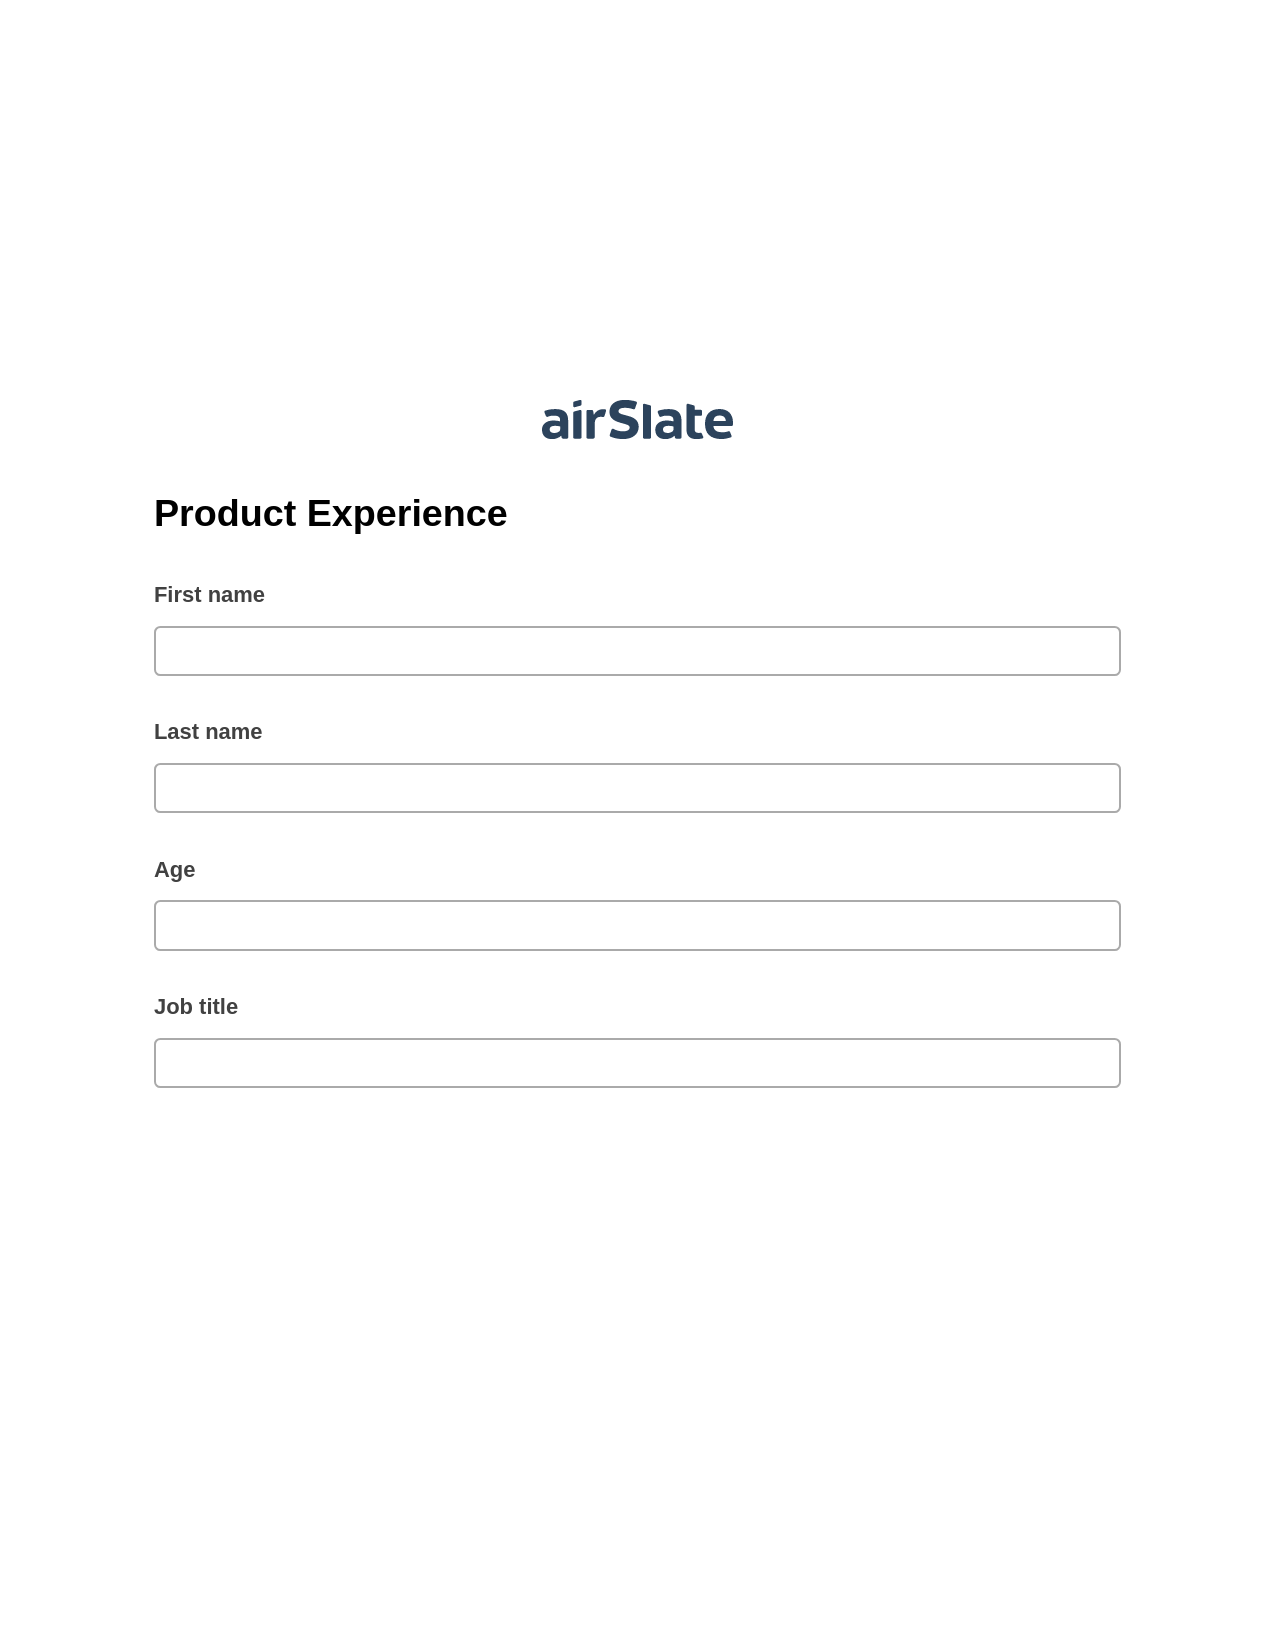 Multirole Product Experience Pre-fill from Salesforce Records Bot, Invoke Salesforce Process Bot, Export to WebMerge Bot